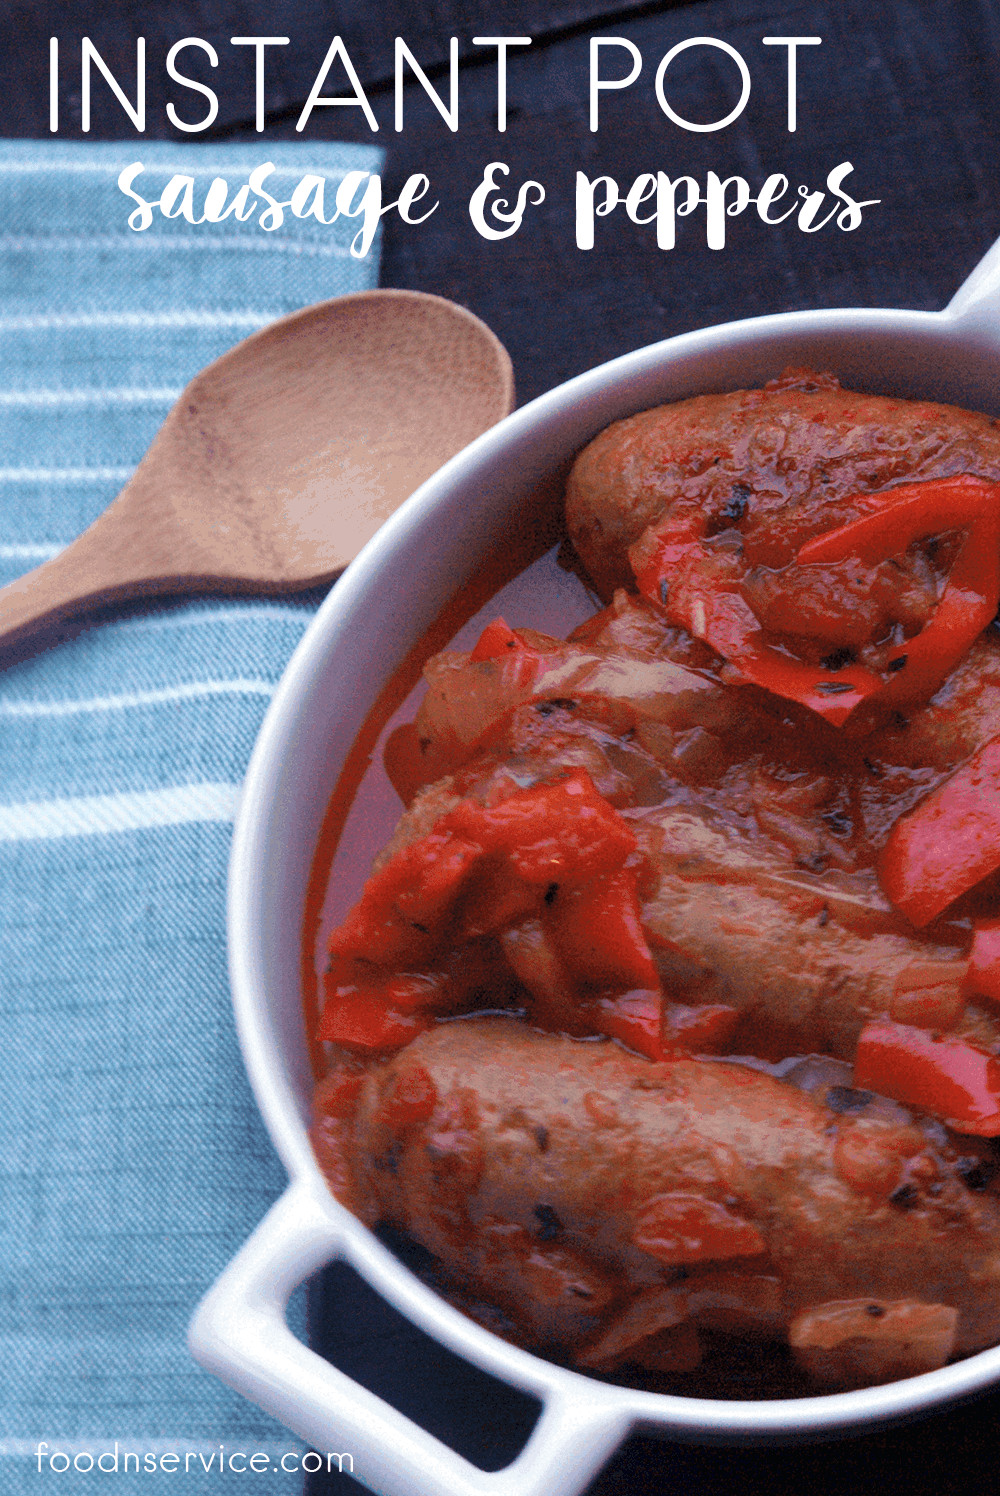 Instant Pot Sausage Recipes
 Instant Pot Sausage and Peppers Recipe You Need To Make Now